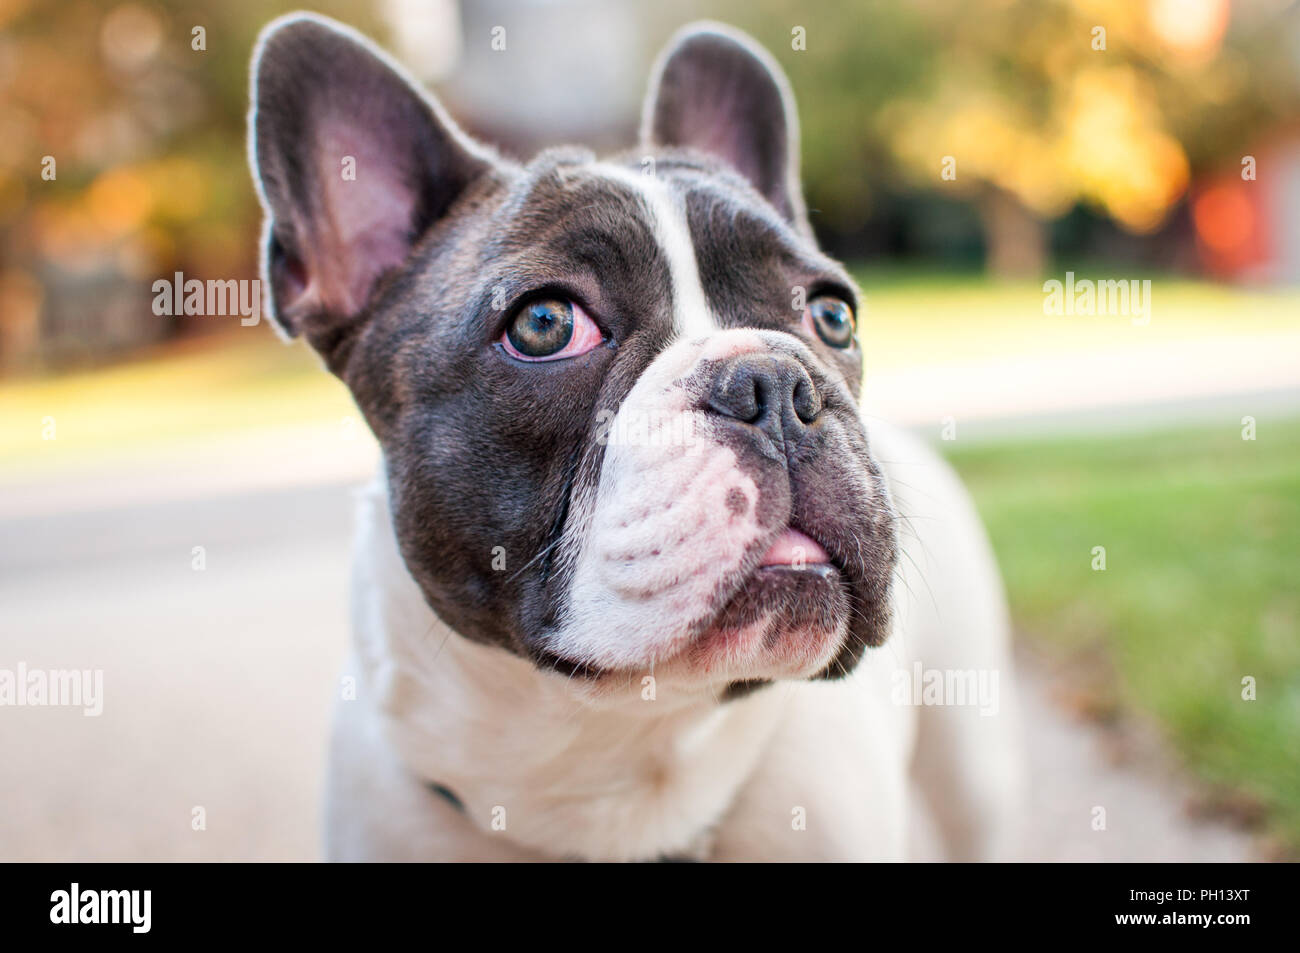 six month old french bulldog